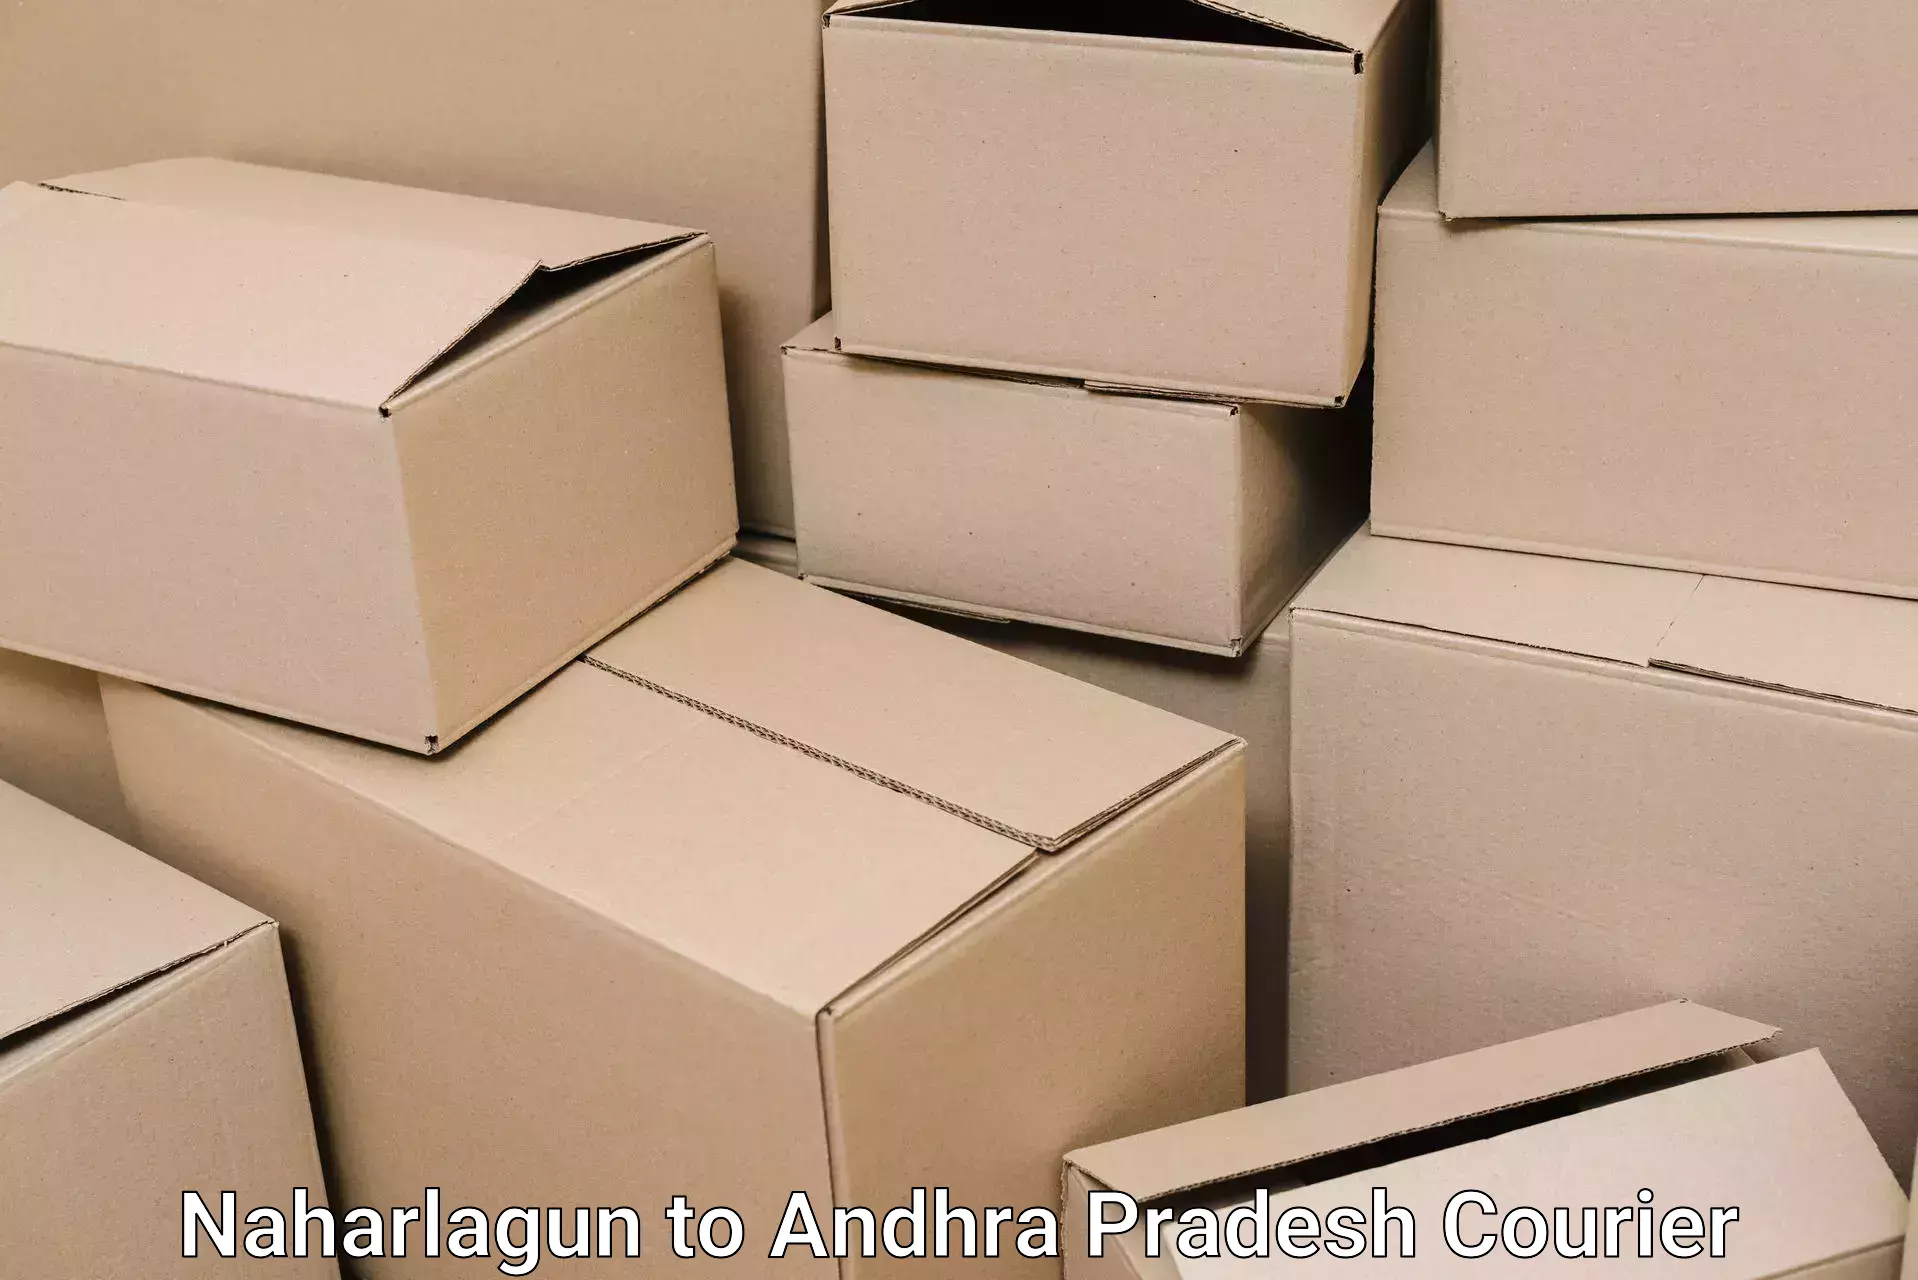 Moving and storage services in Naharlagun to Andhra Pradesh